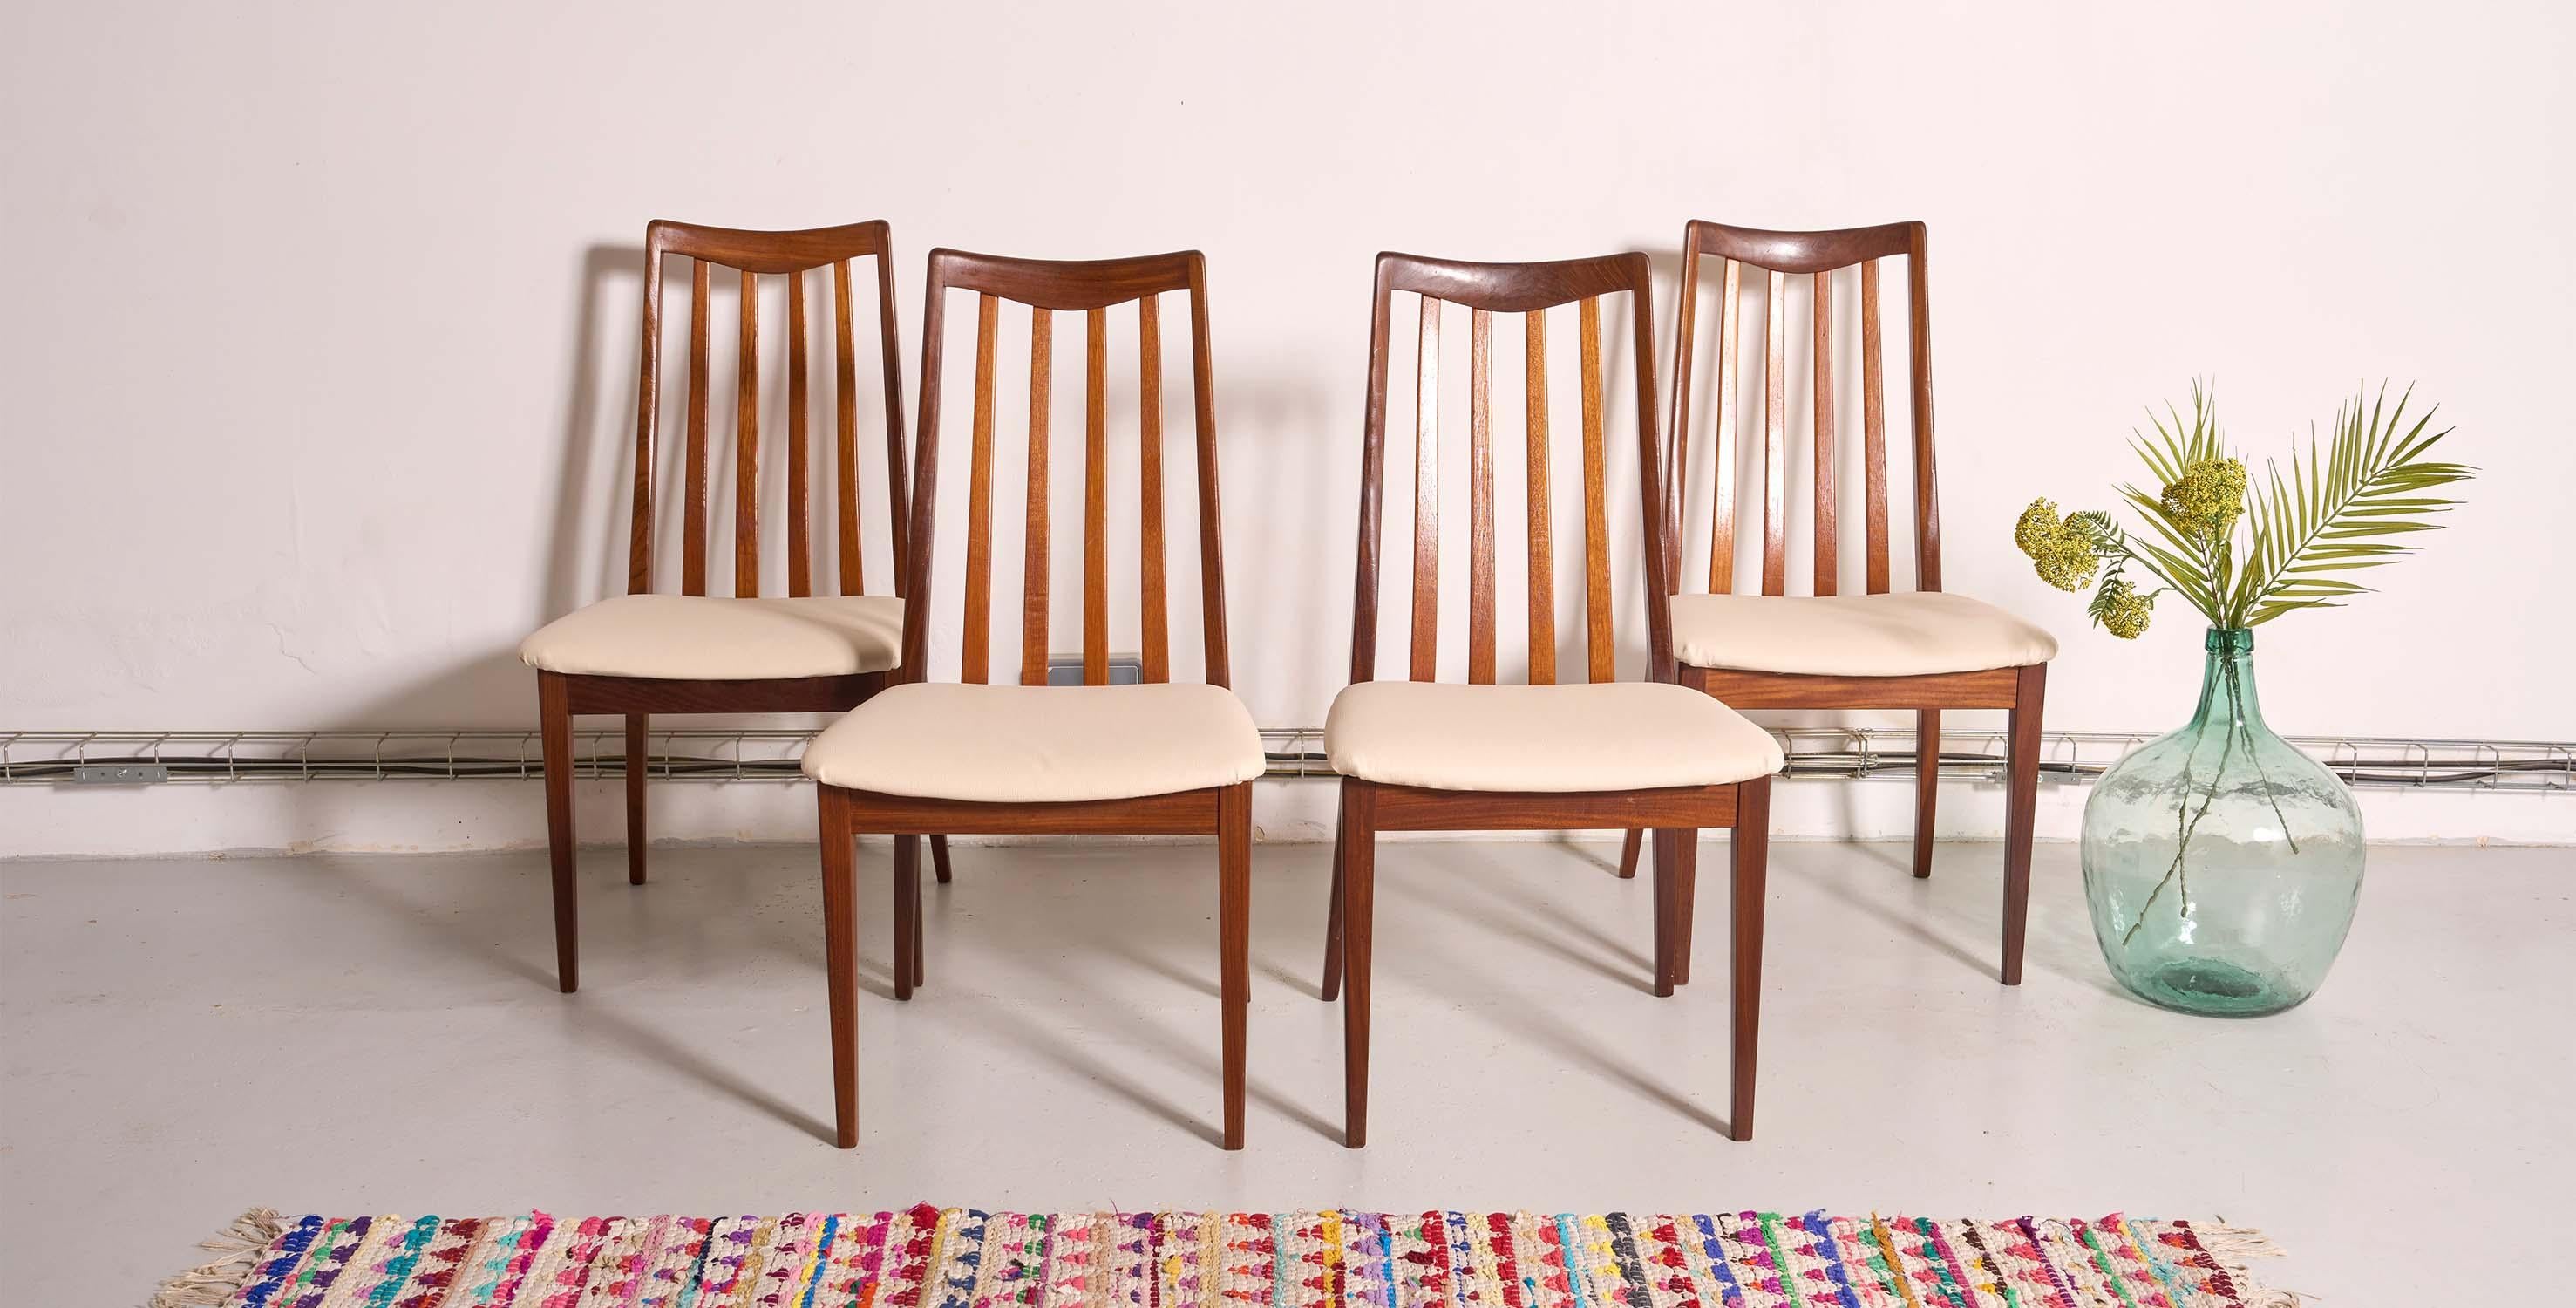 Timeless design for this set of 4 vintage Scandinavian-style G Plan chairs dating from the 1960s.

Set of 4 chairs with teak frame, curved bar back and cream skai fabric seat (new fabric).
The 4 chairs are identical and date from the 1960s.

English